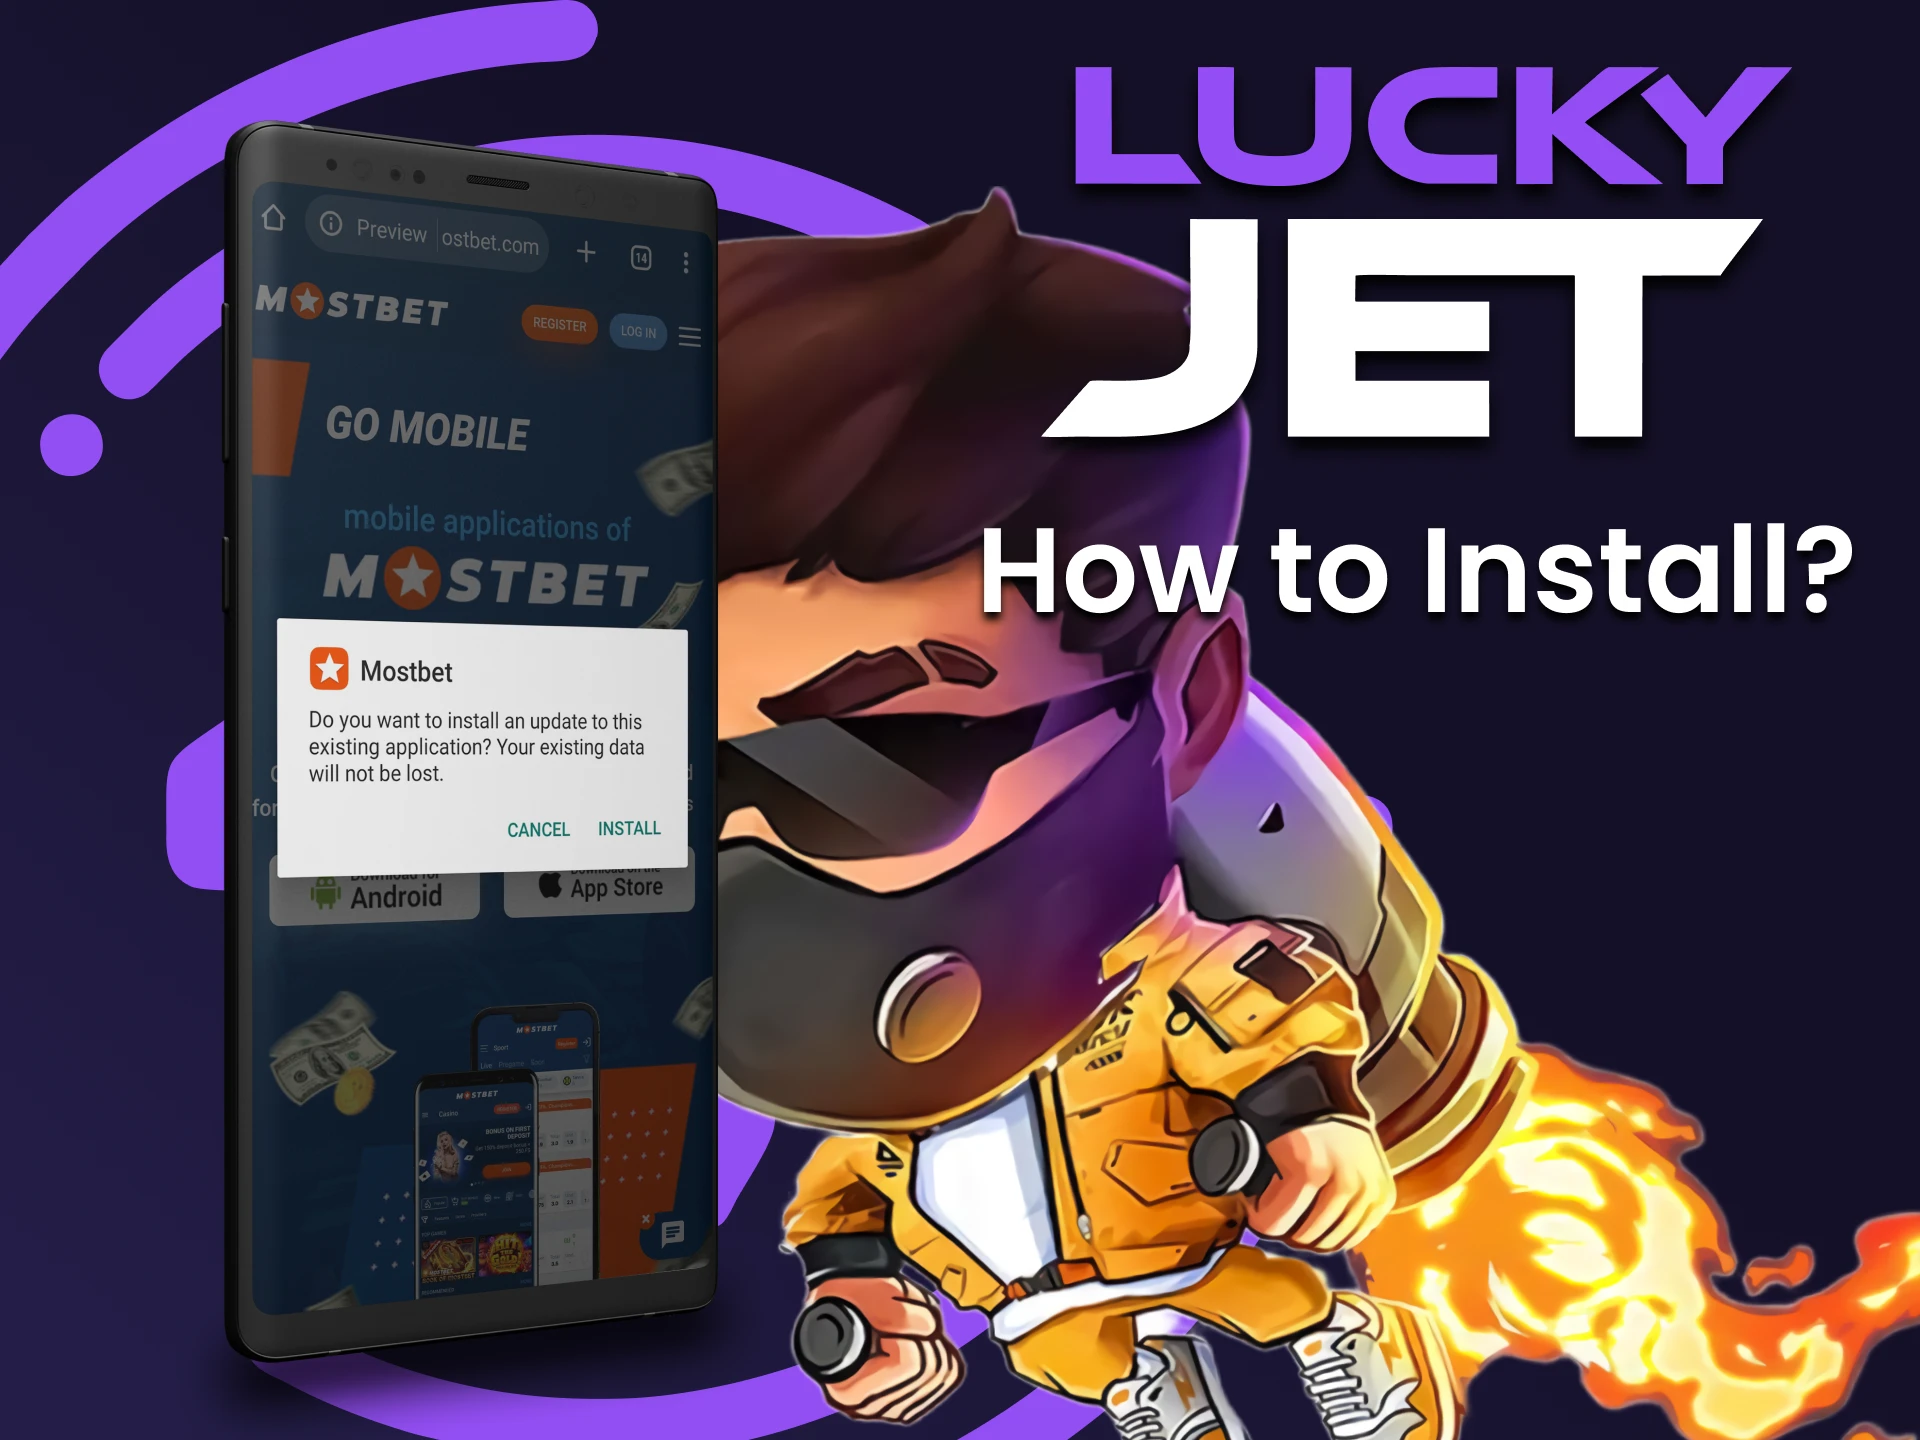 Learn how to install the Lucky Jet app.